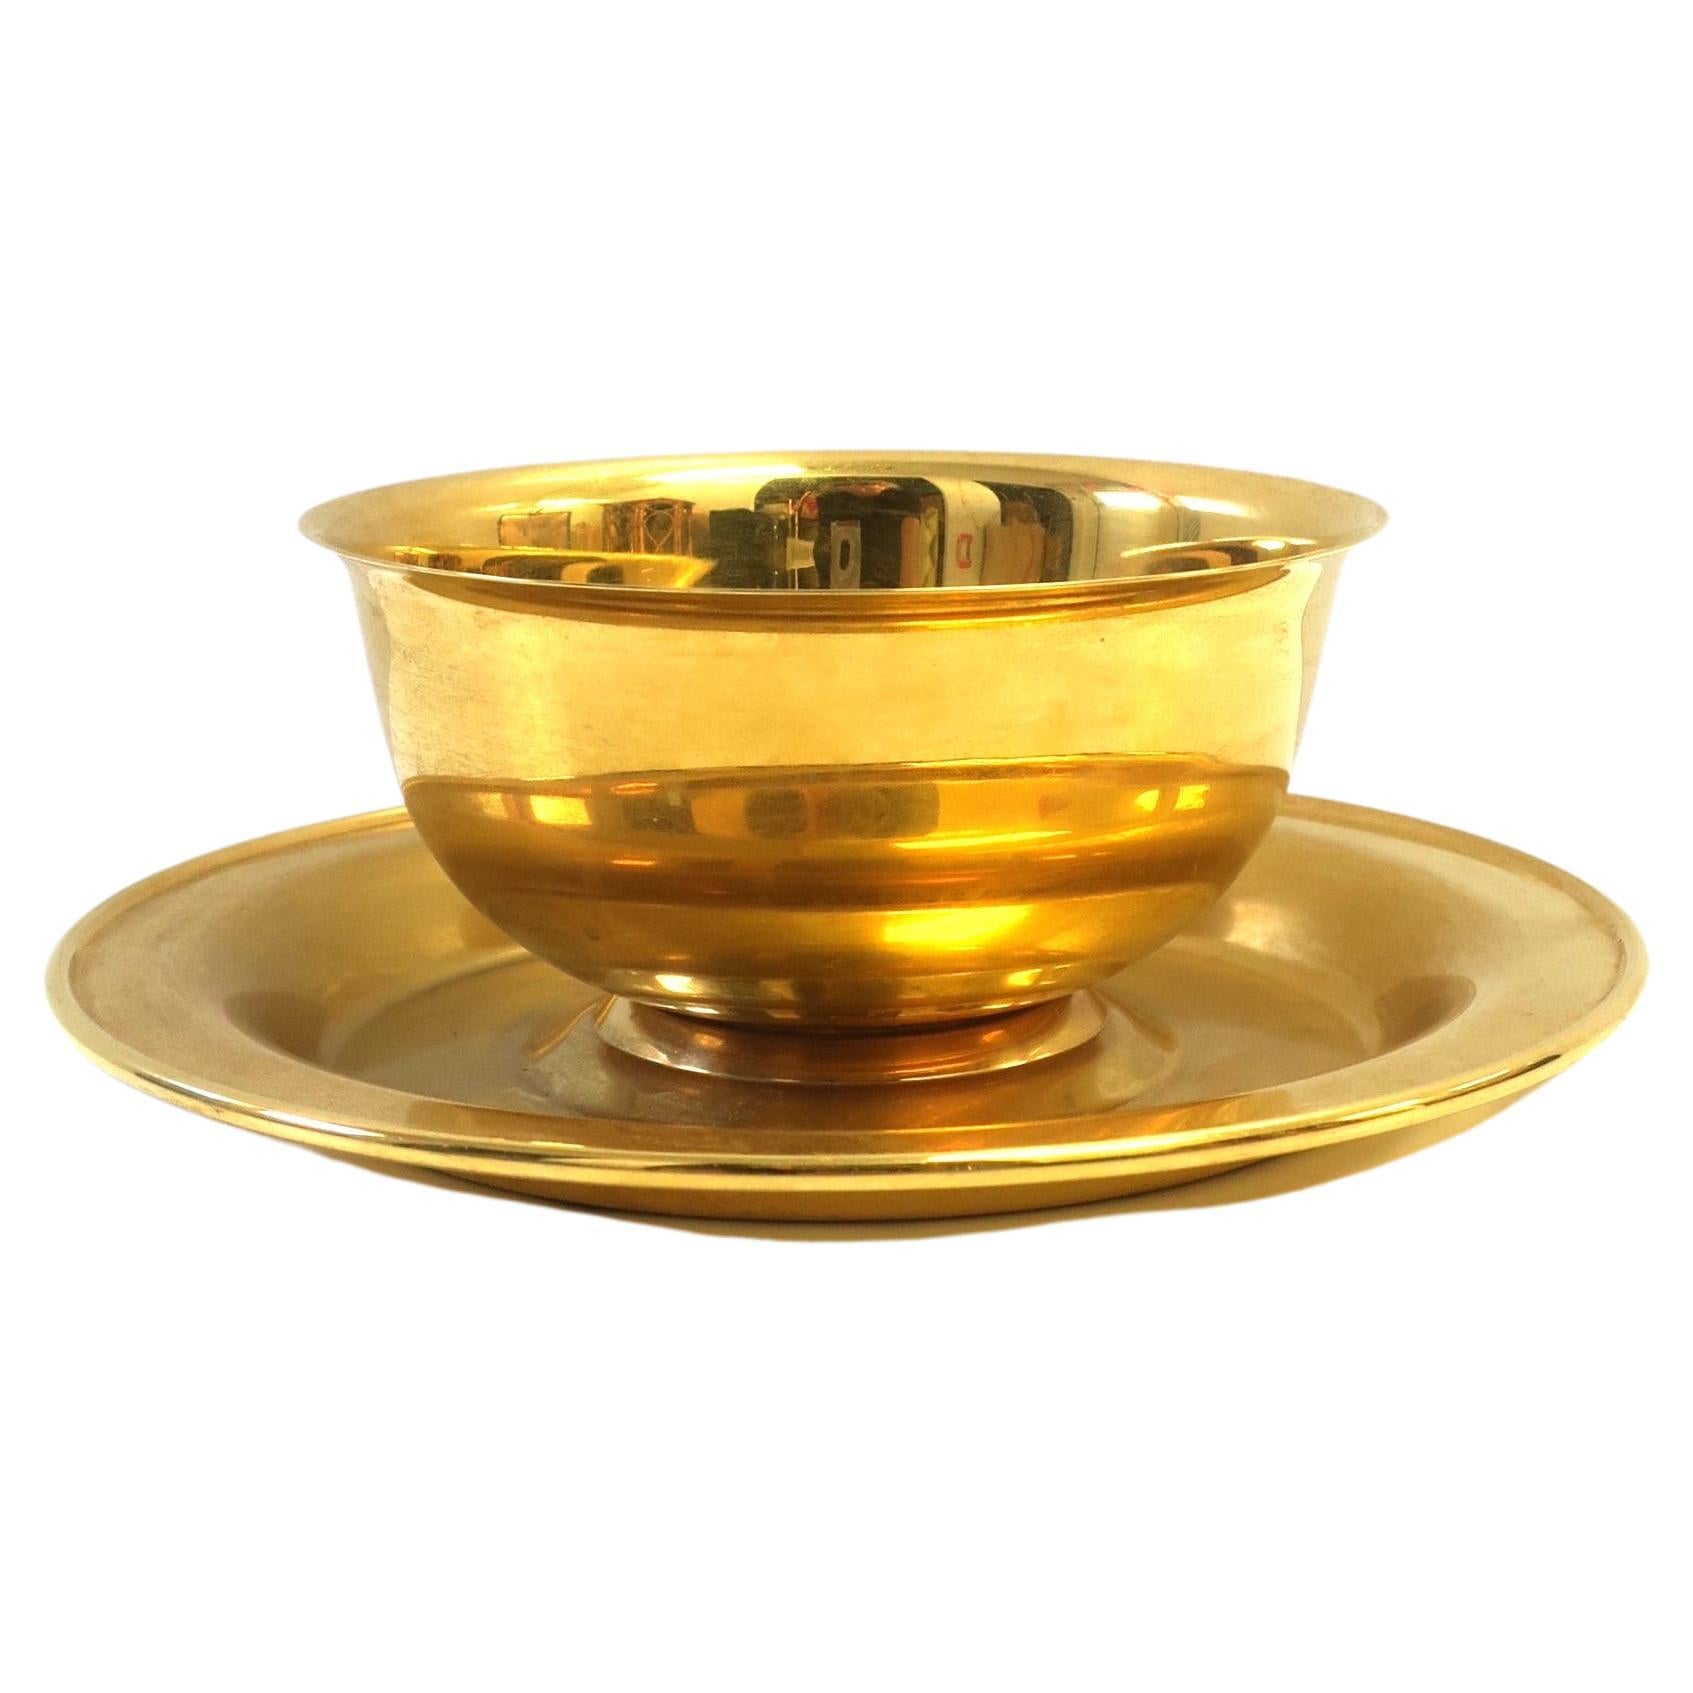 Gold Plated Revere Serving Bowl and Underplate Saucer